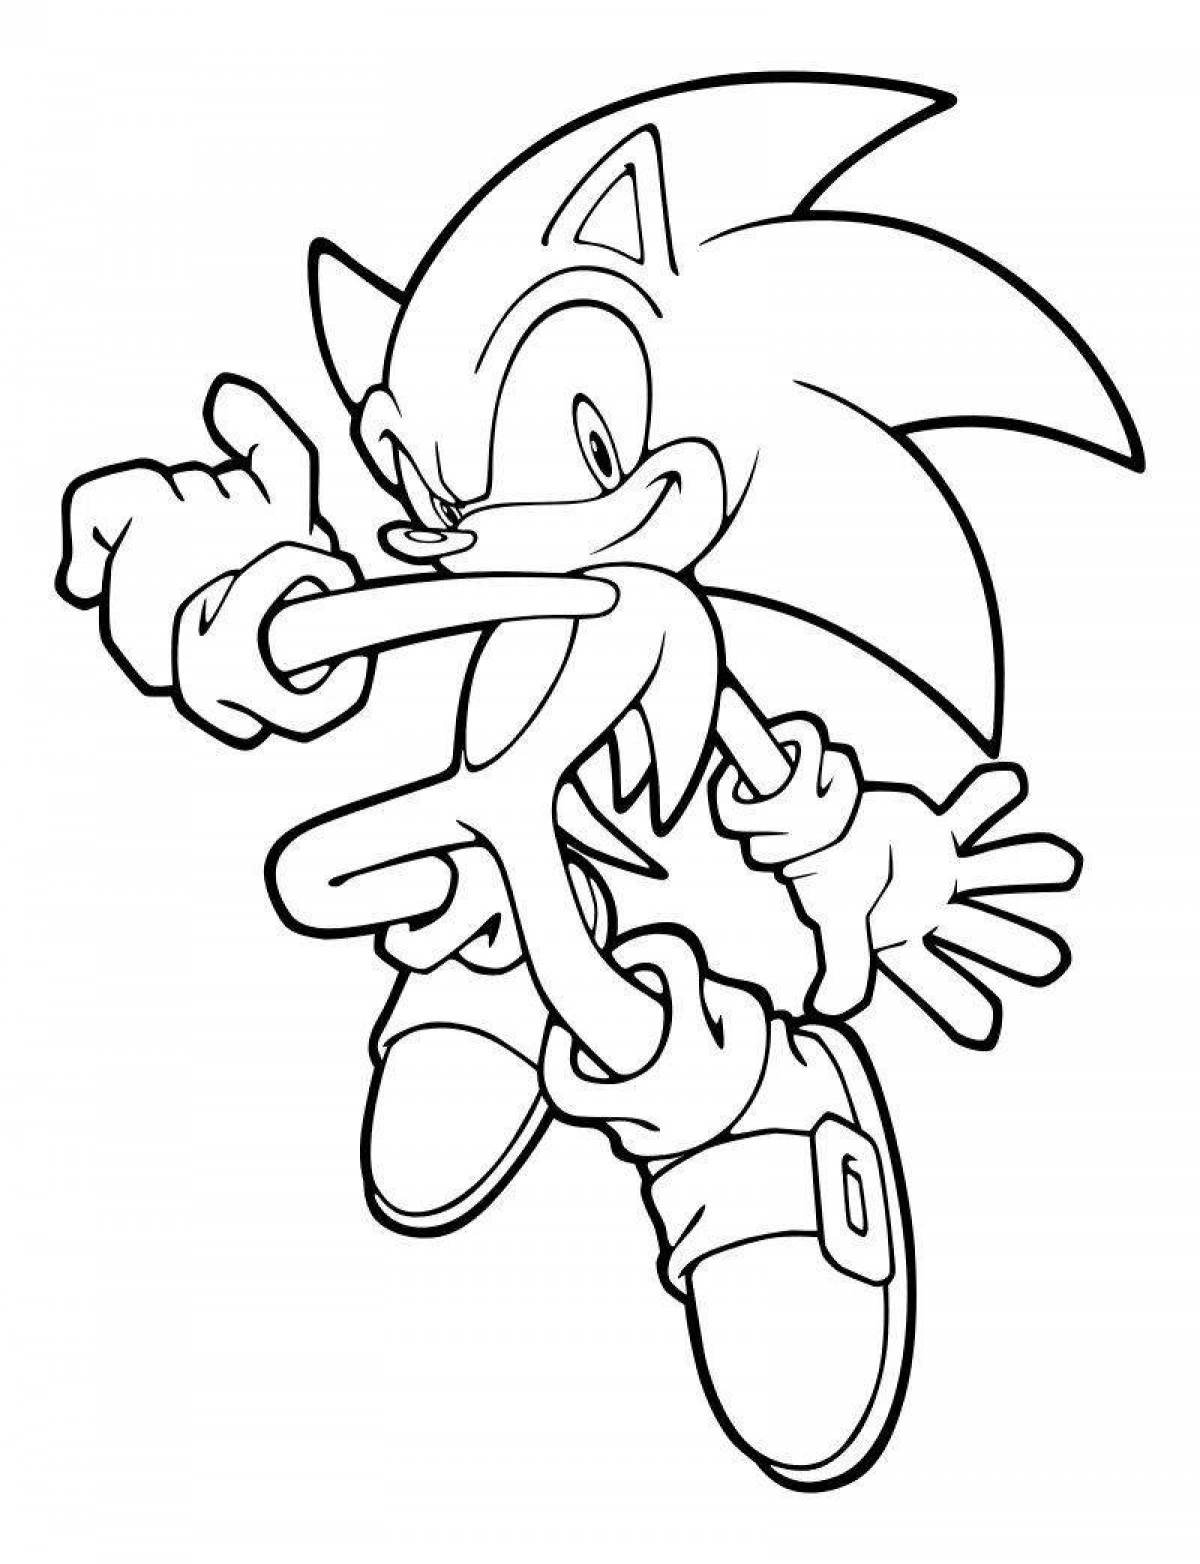 Sweet sonic exe coloring book for kids